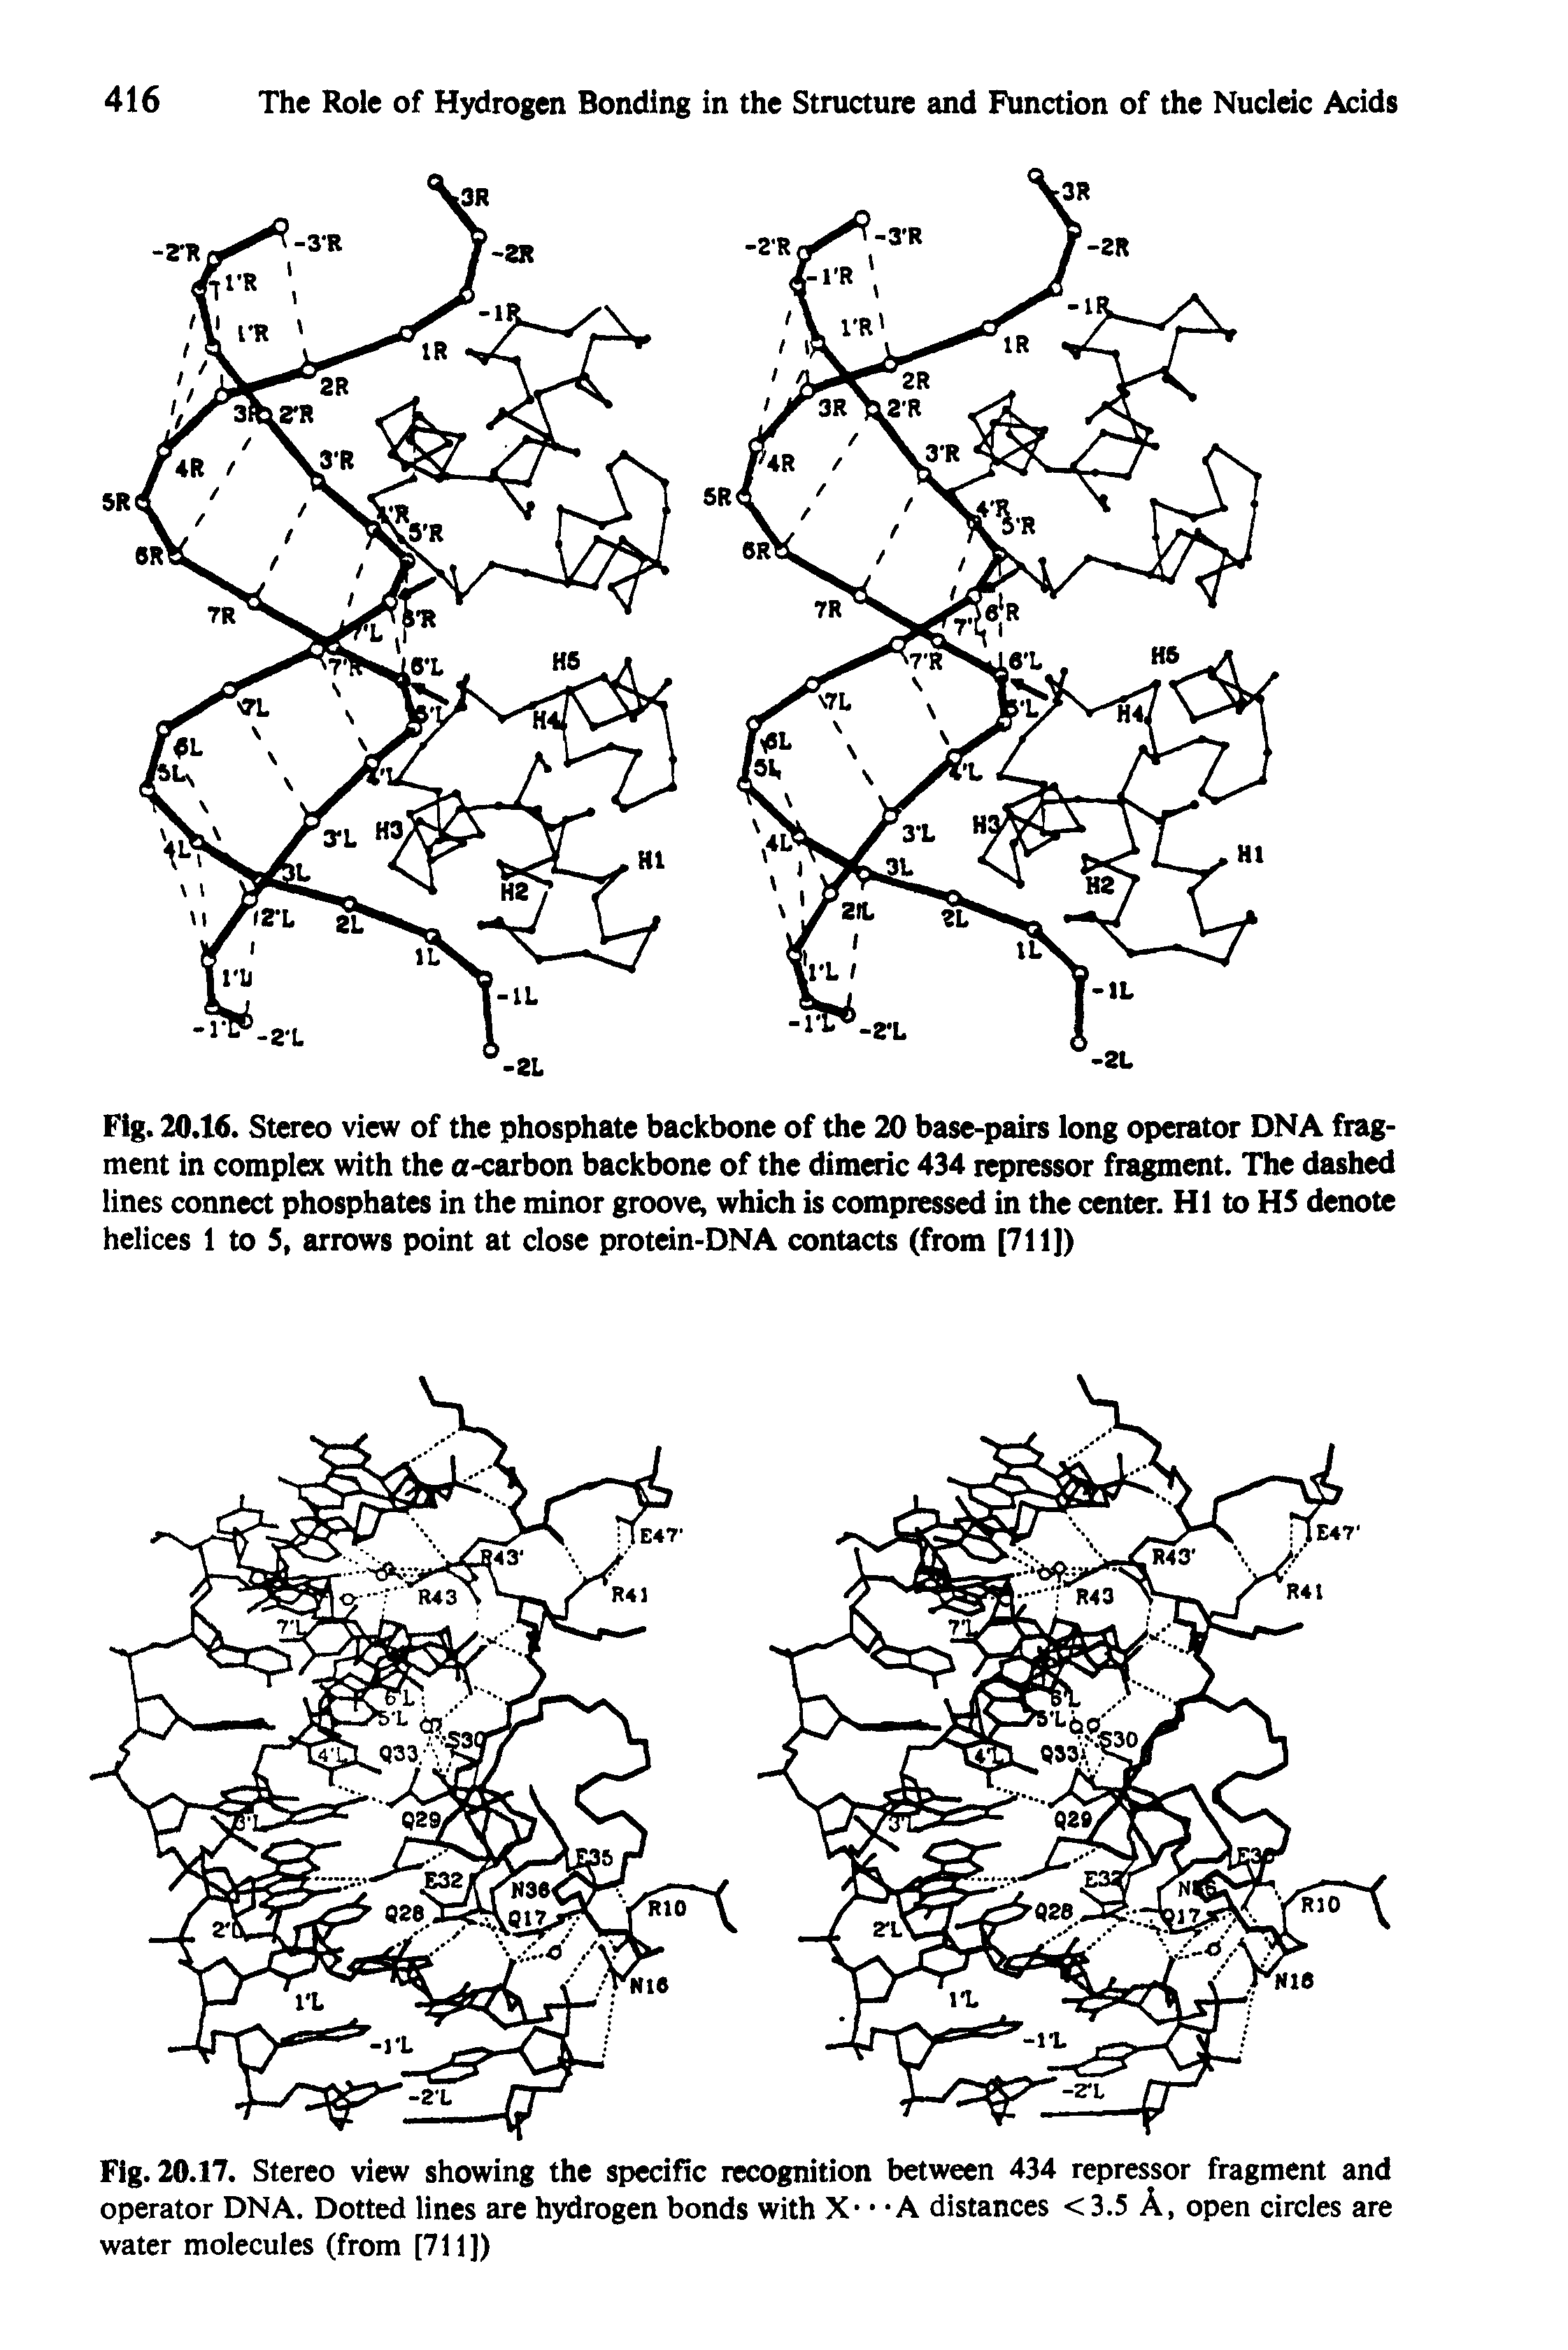 Fig. 20.16. Stereo view of the phosphate backbone of the 20 base-pairs long operator DNA fragment in complex with the a-carbon backbone of the dimeric 434 repressor fragment. The dashed lines connect phosphates in the minor groove, which is compressed in the center. HI to HS denote helices 1 to 5, arrows point at close protein-DNA contacts (from [711])...